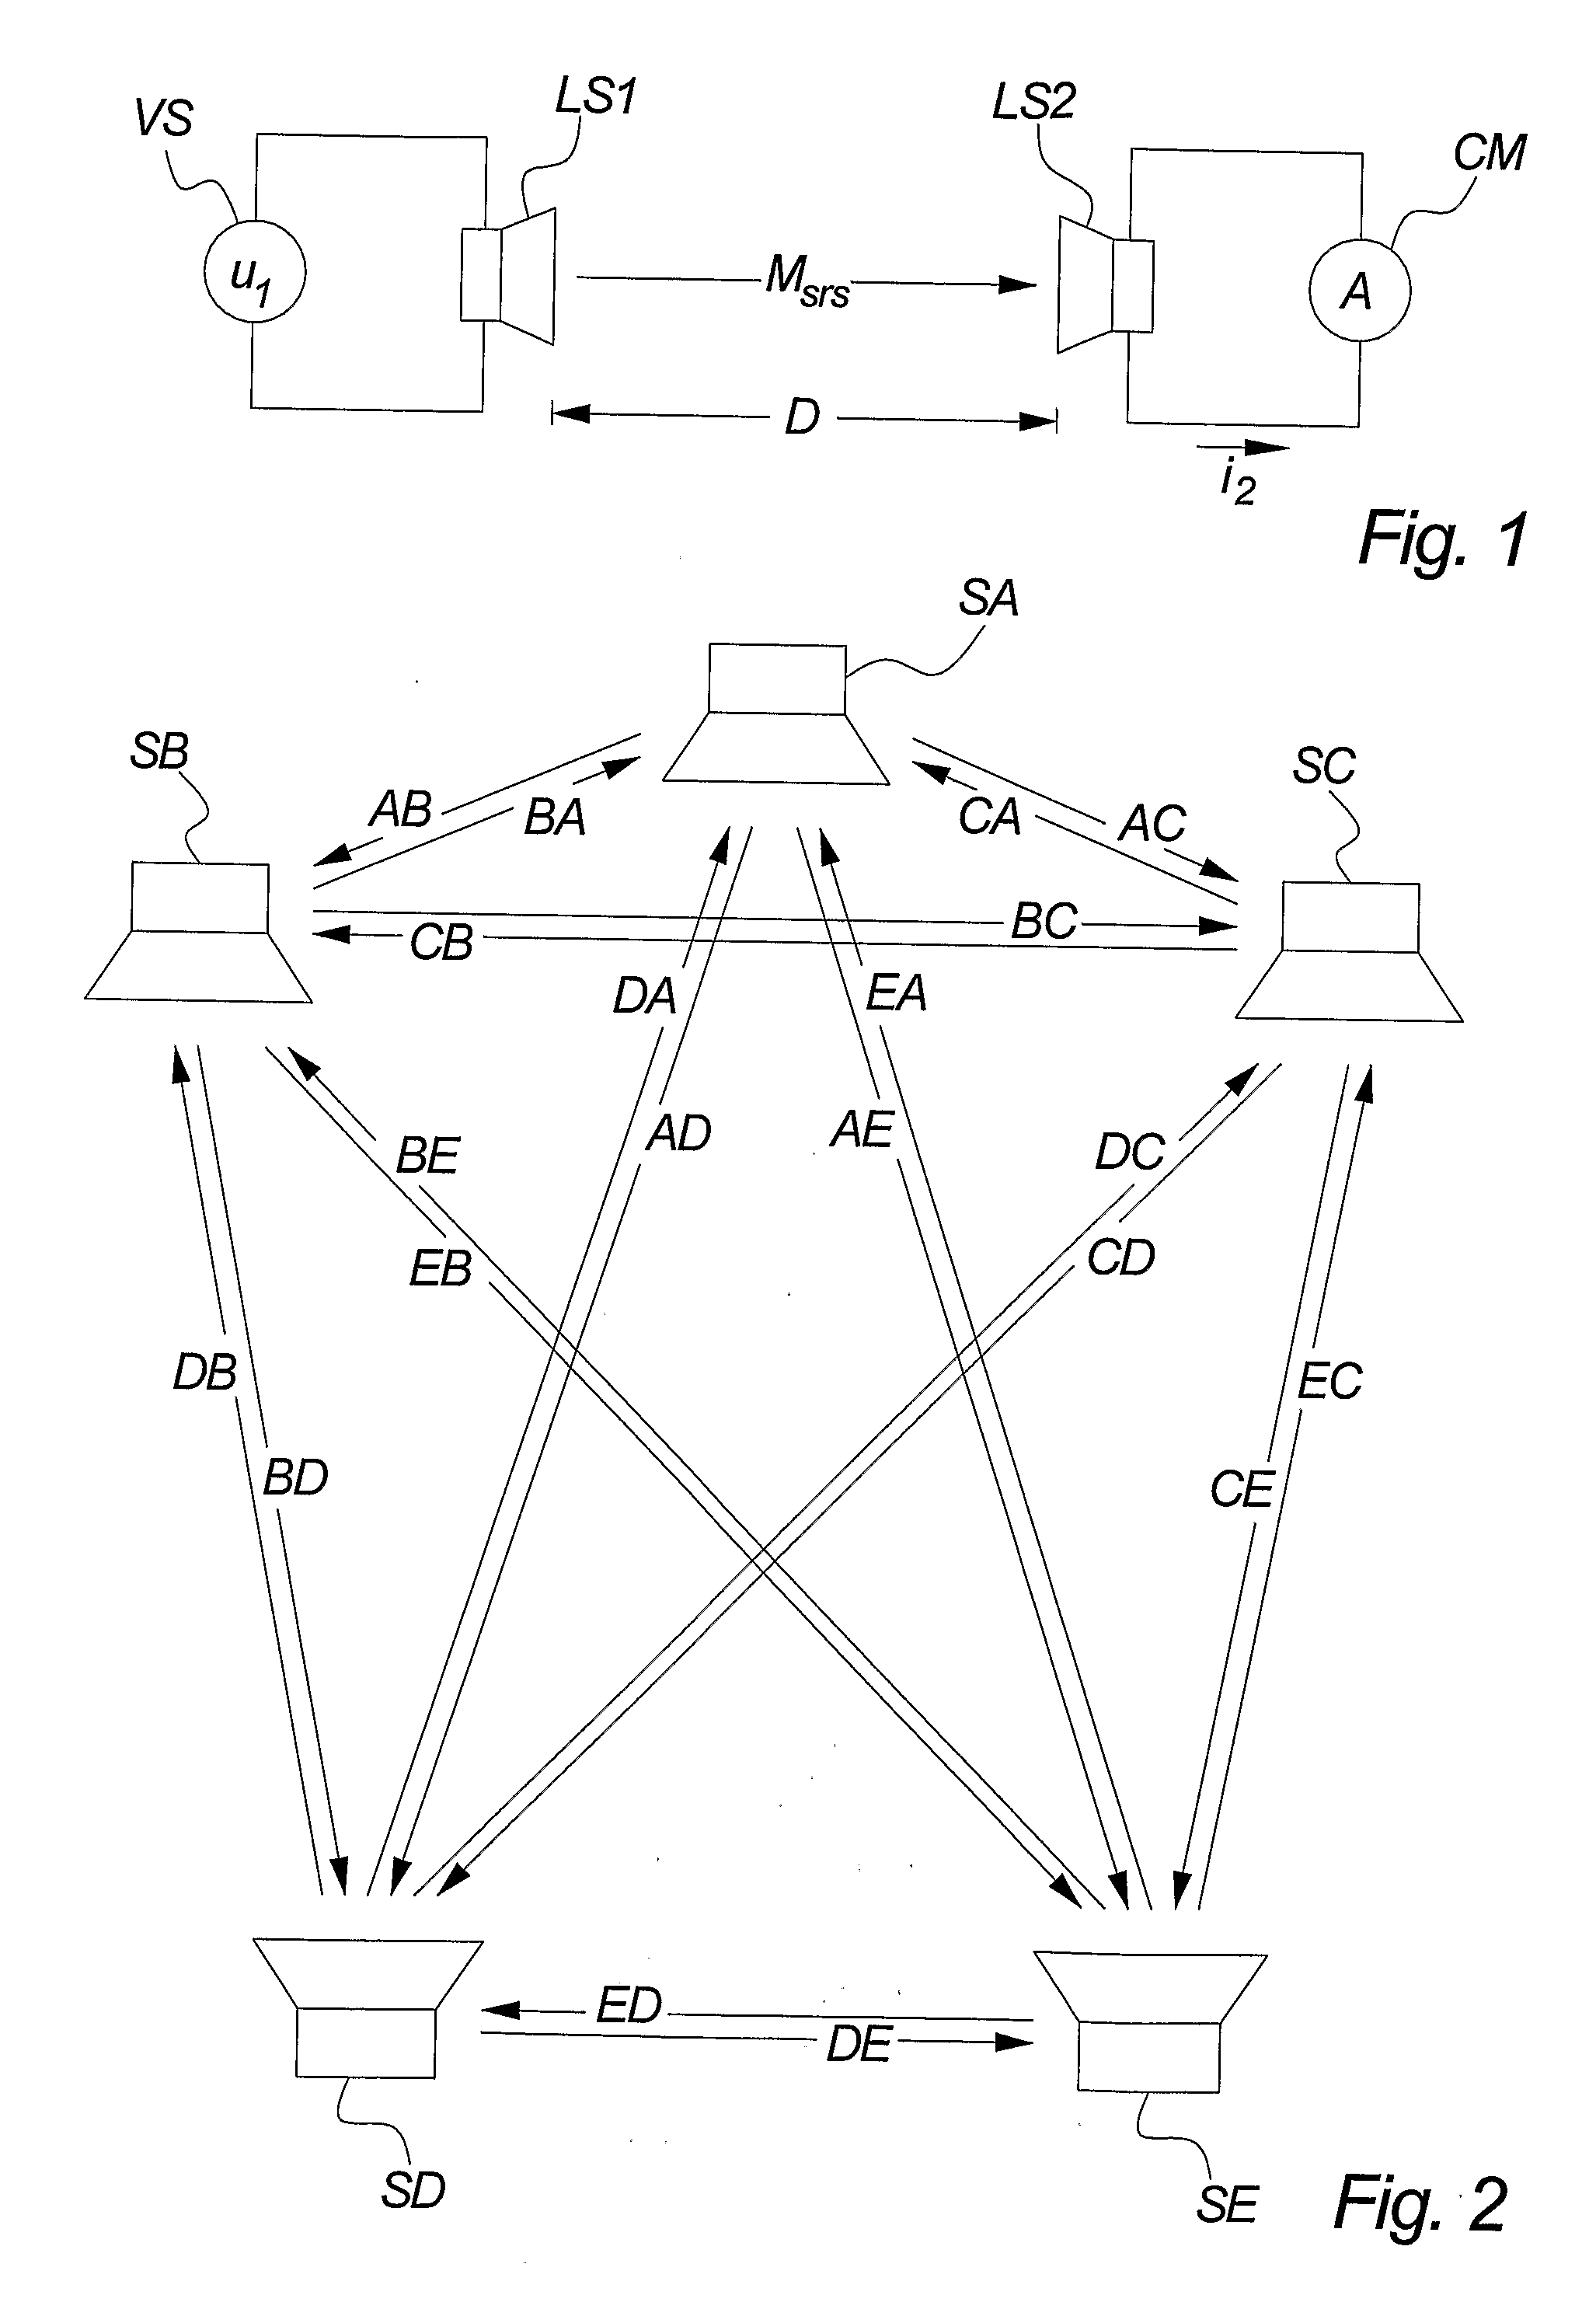 Method of Performing Measurements By Means of an Audio System Comprising Passive Loudspeakers